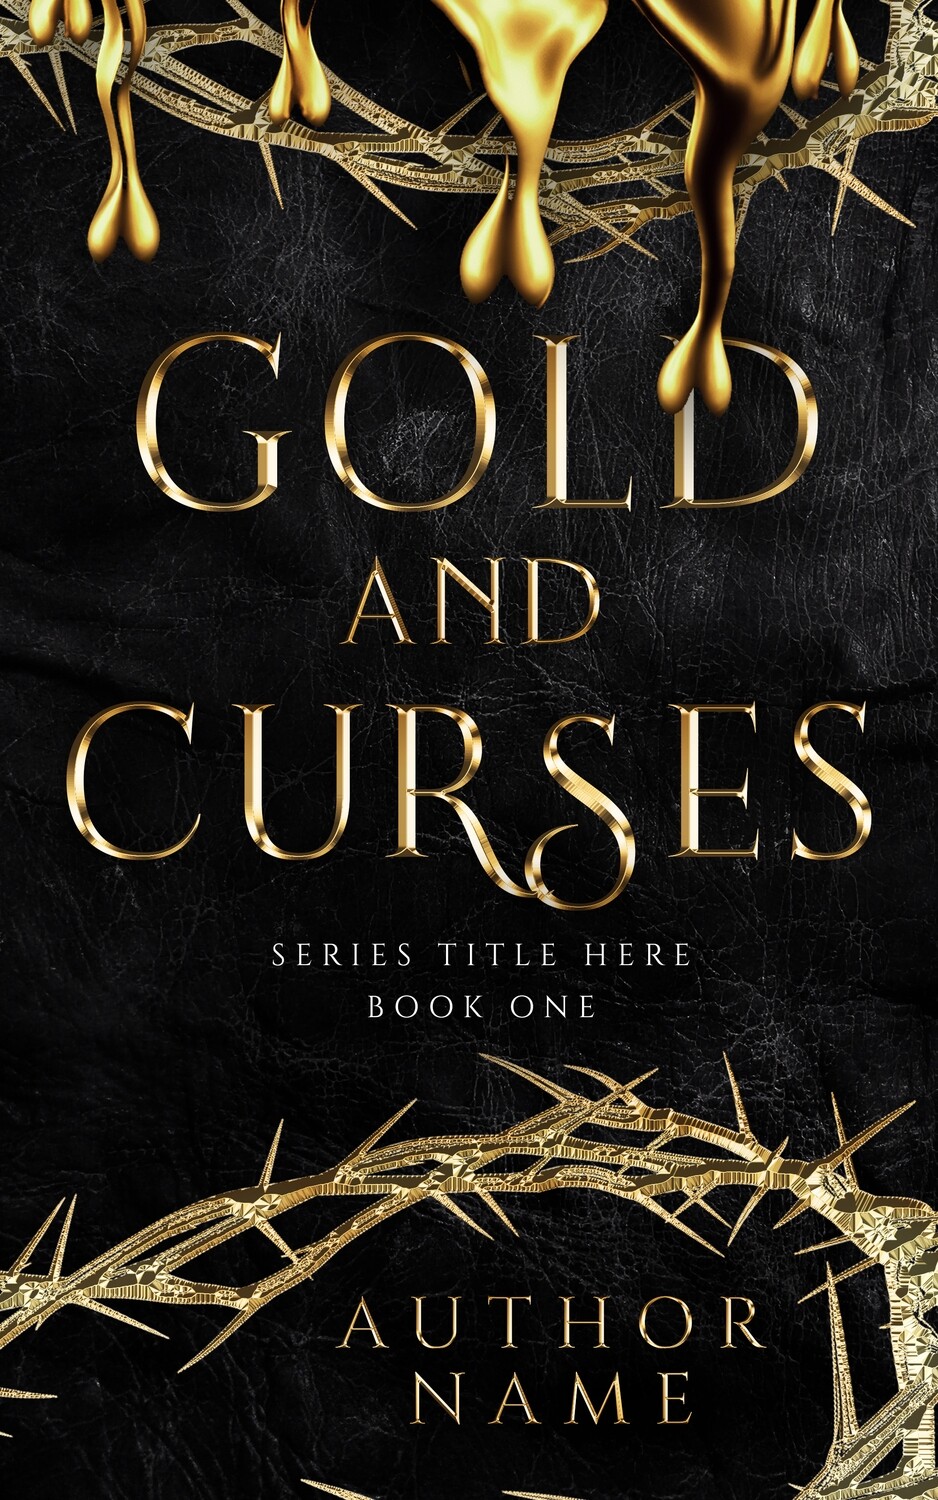 GOLD AND CURSES